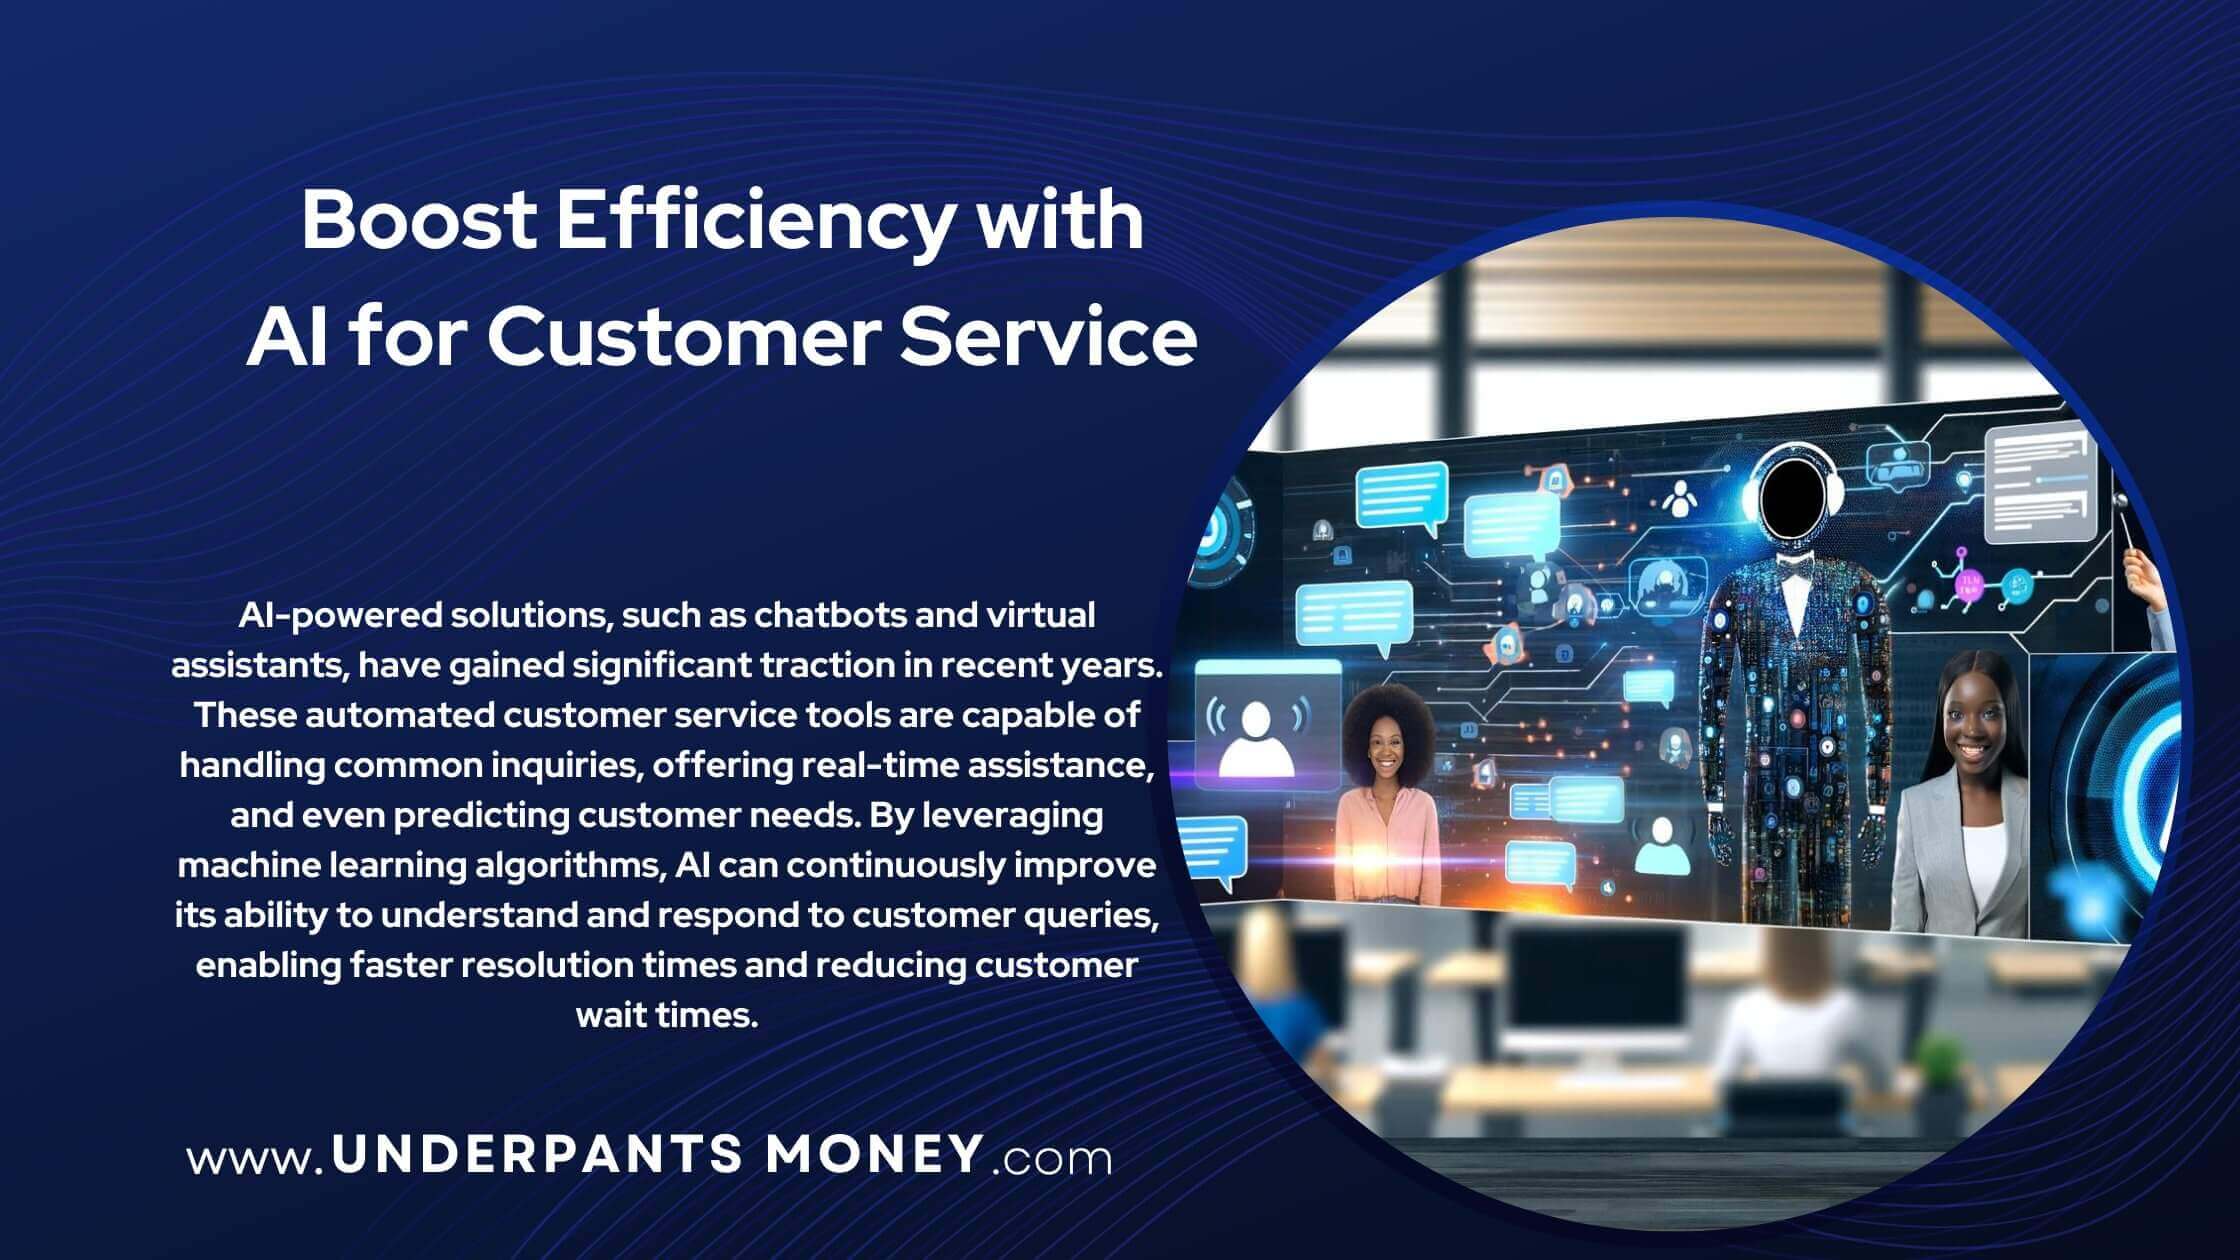 Ai for customer service title and description on blue with image of Ai chatbots helping customer services